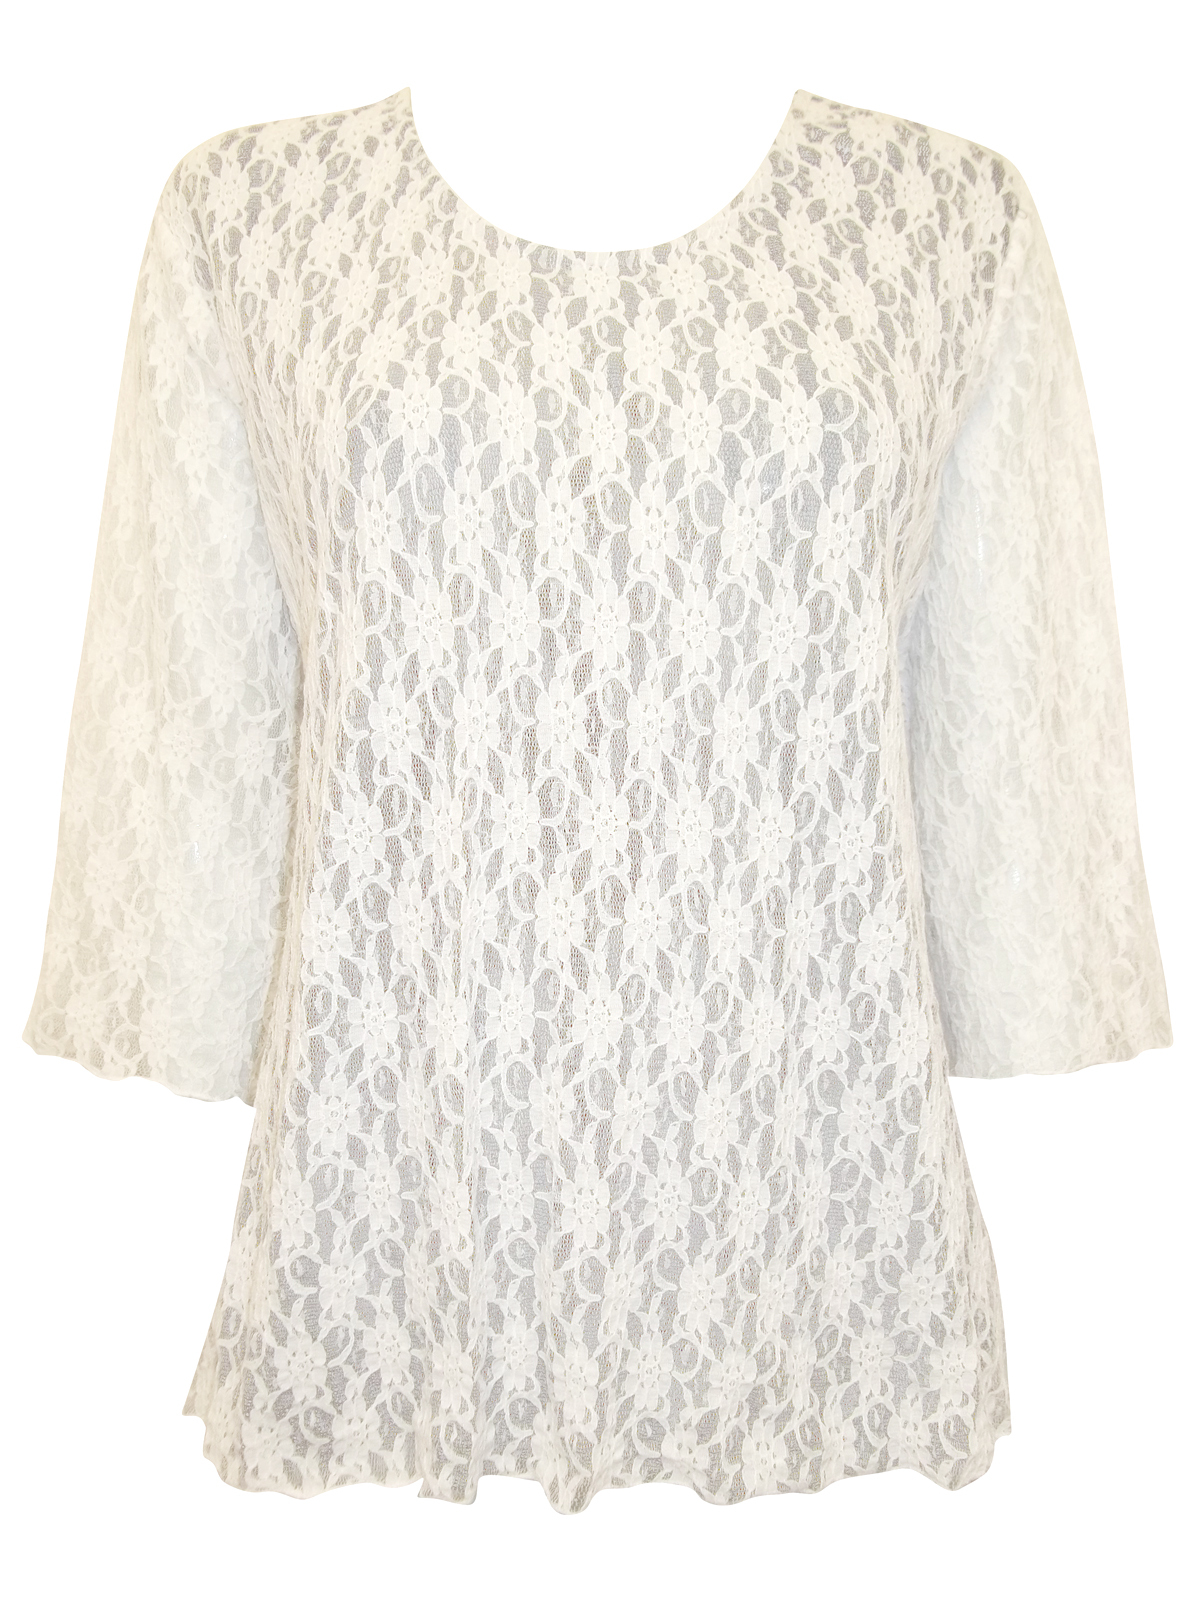 Eaonplus IVORY Overlaid Lace 3/4 Sleeve Top - Plus Size 18 to 32